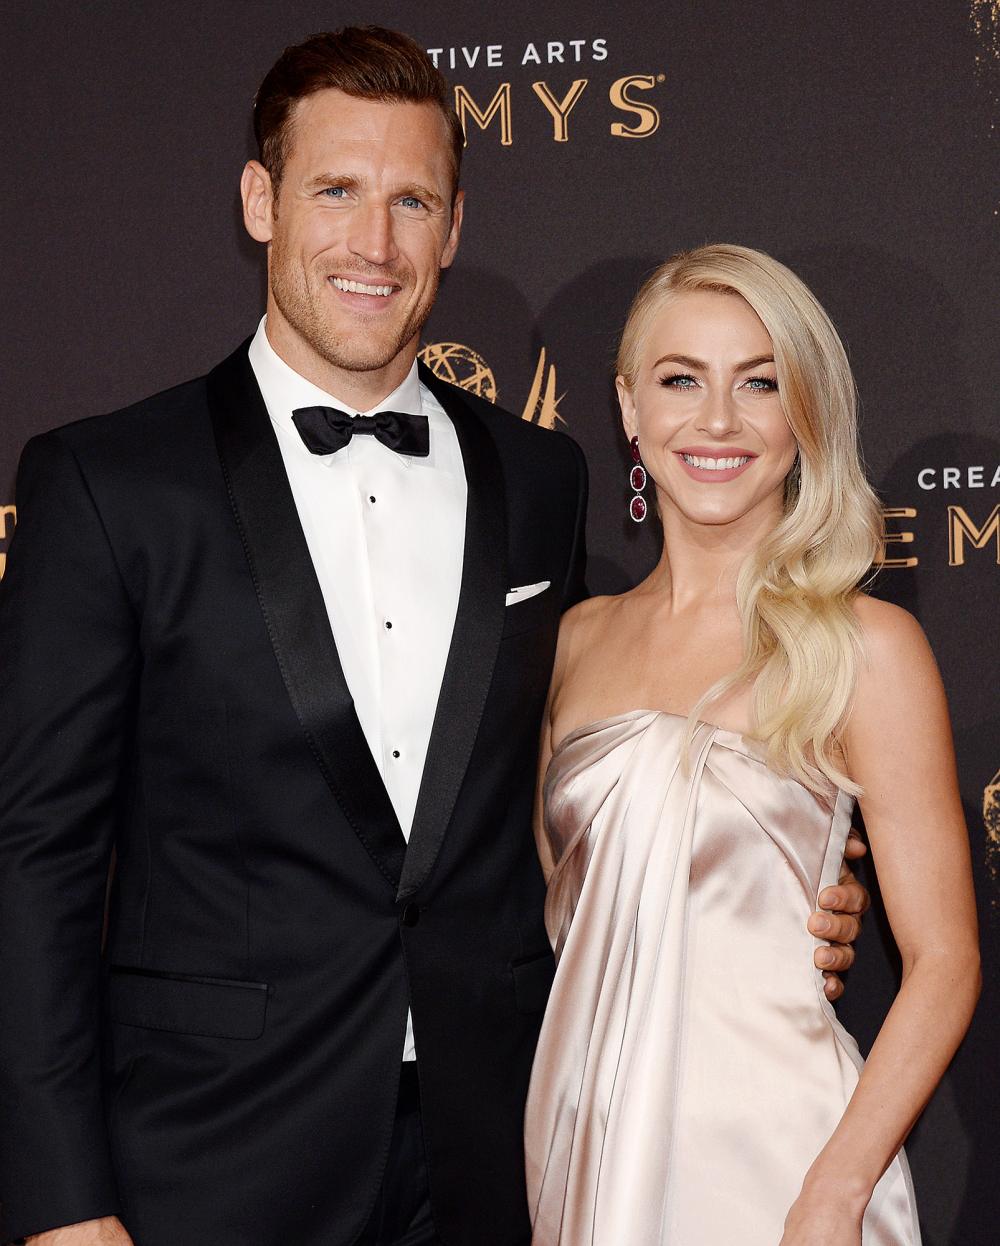 Julianne Hough Shares Funny Video With Estranged Husband Brooks Laich’s Dog